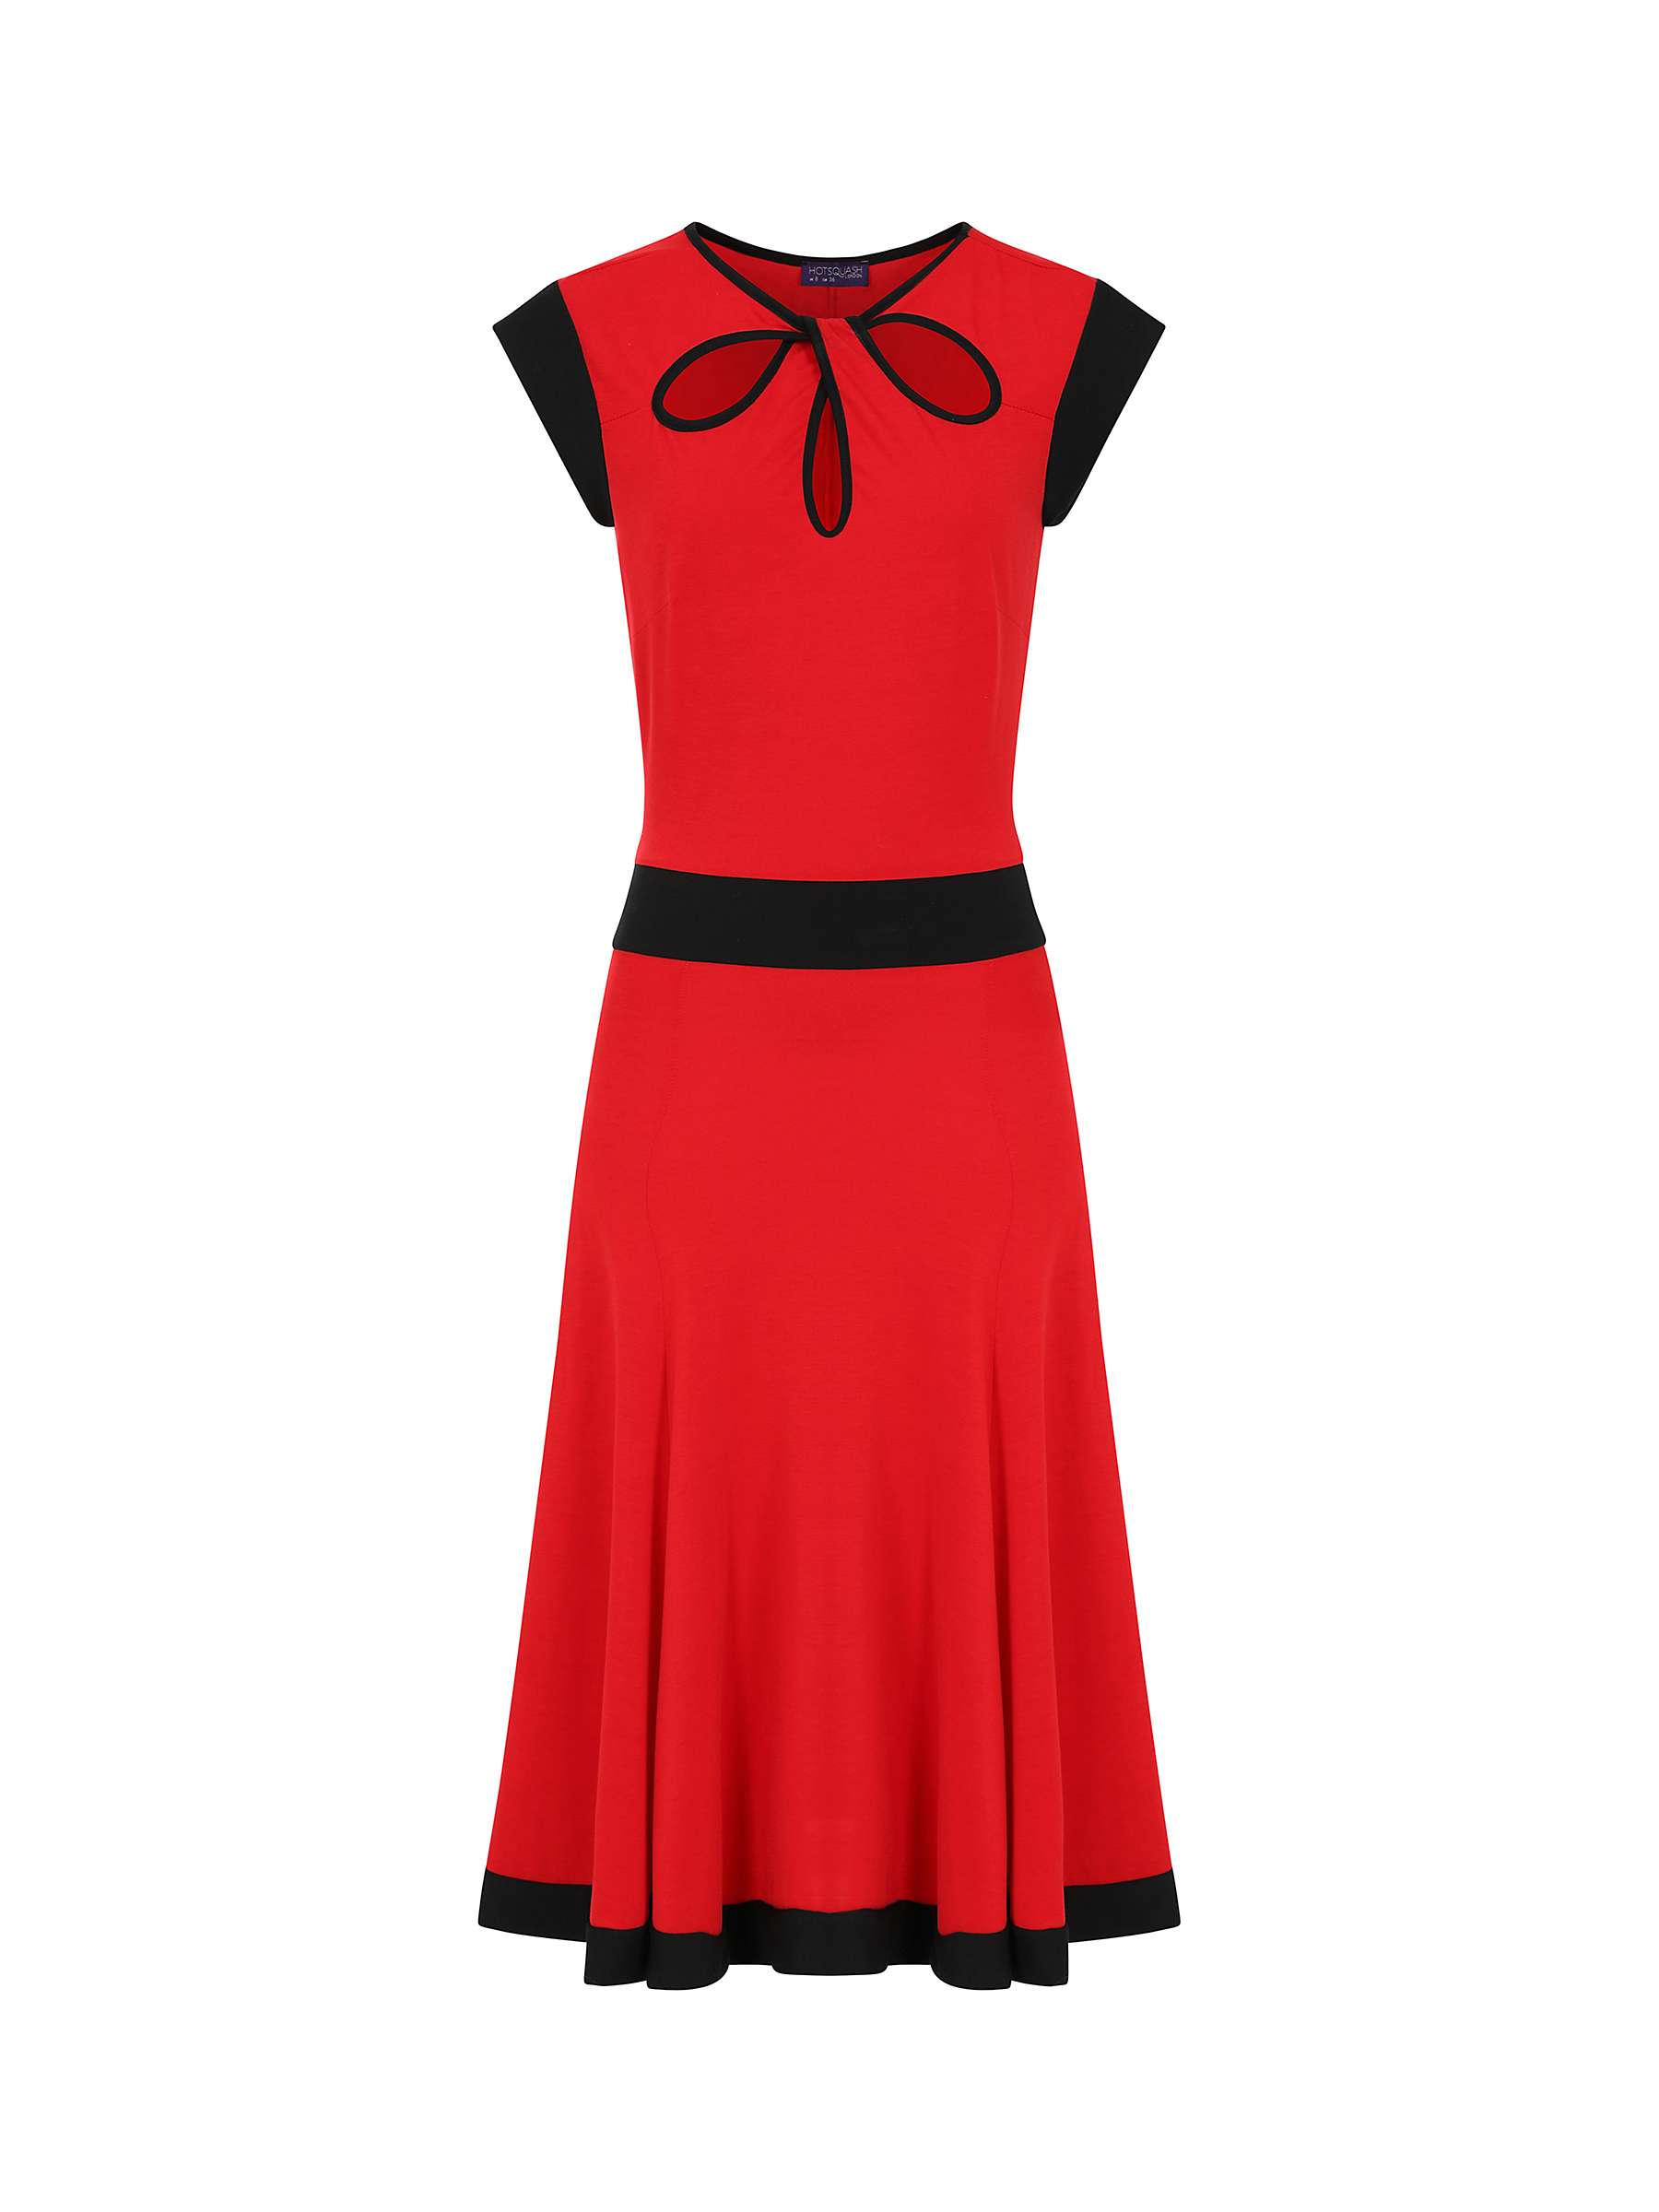 Buy HotSquash Keyhole Detail Fit And Flare Dress, Red/Black Online at johnlewis.com